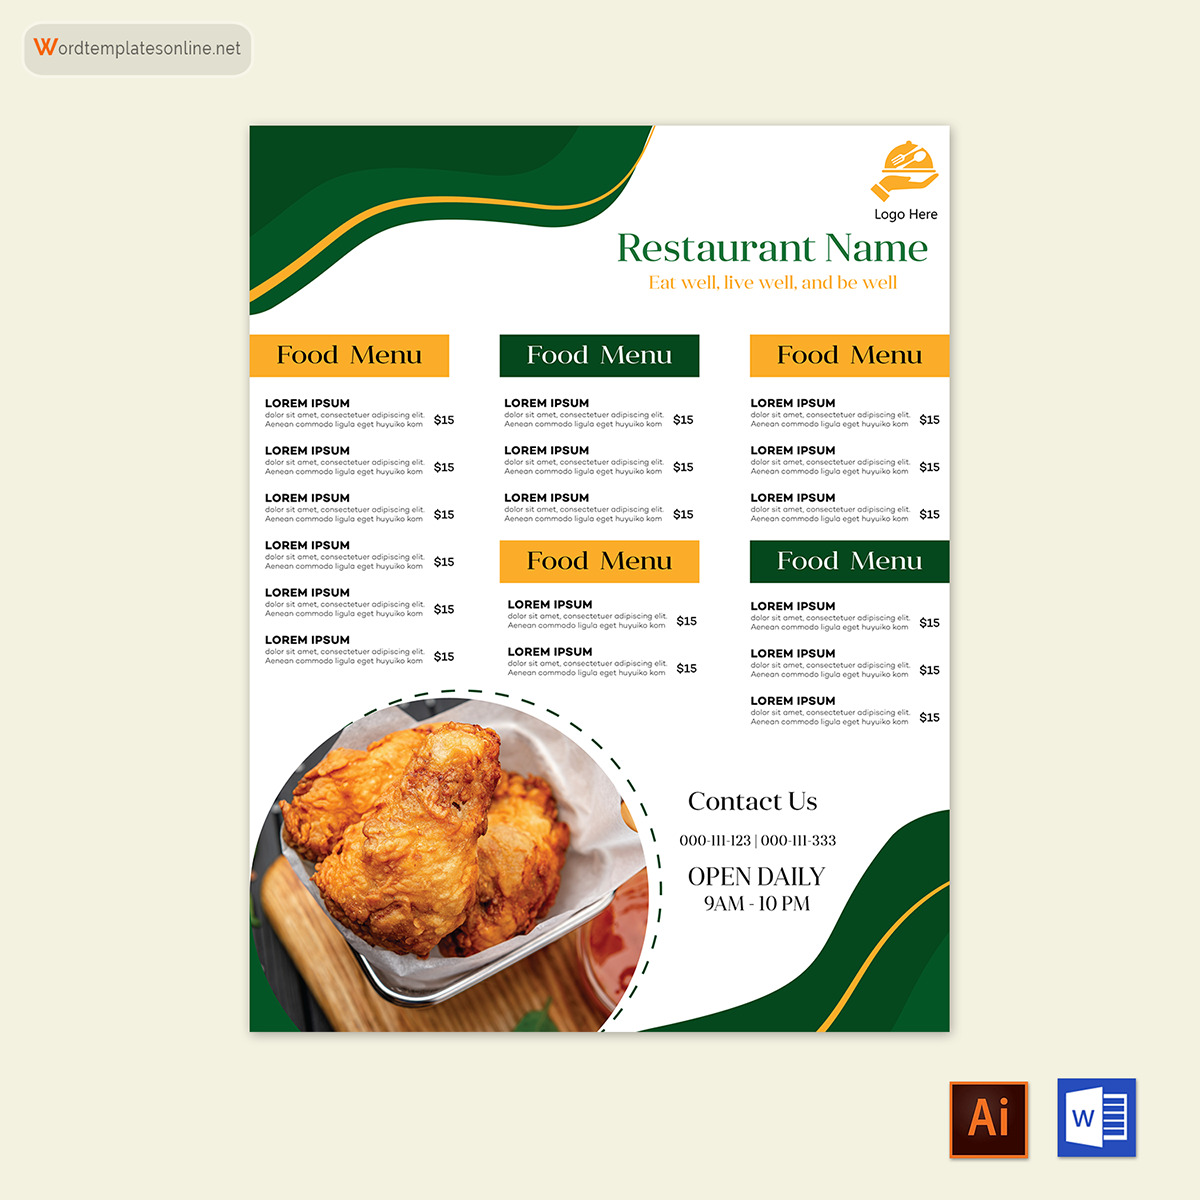 Great Downloadable Restaurant Food Menu Template 01 as Word File and AI Generated Image